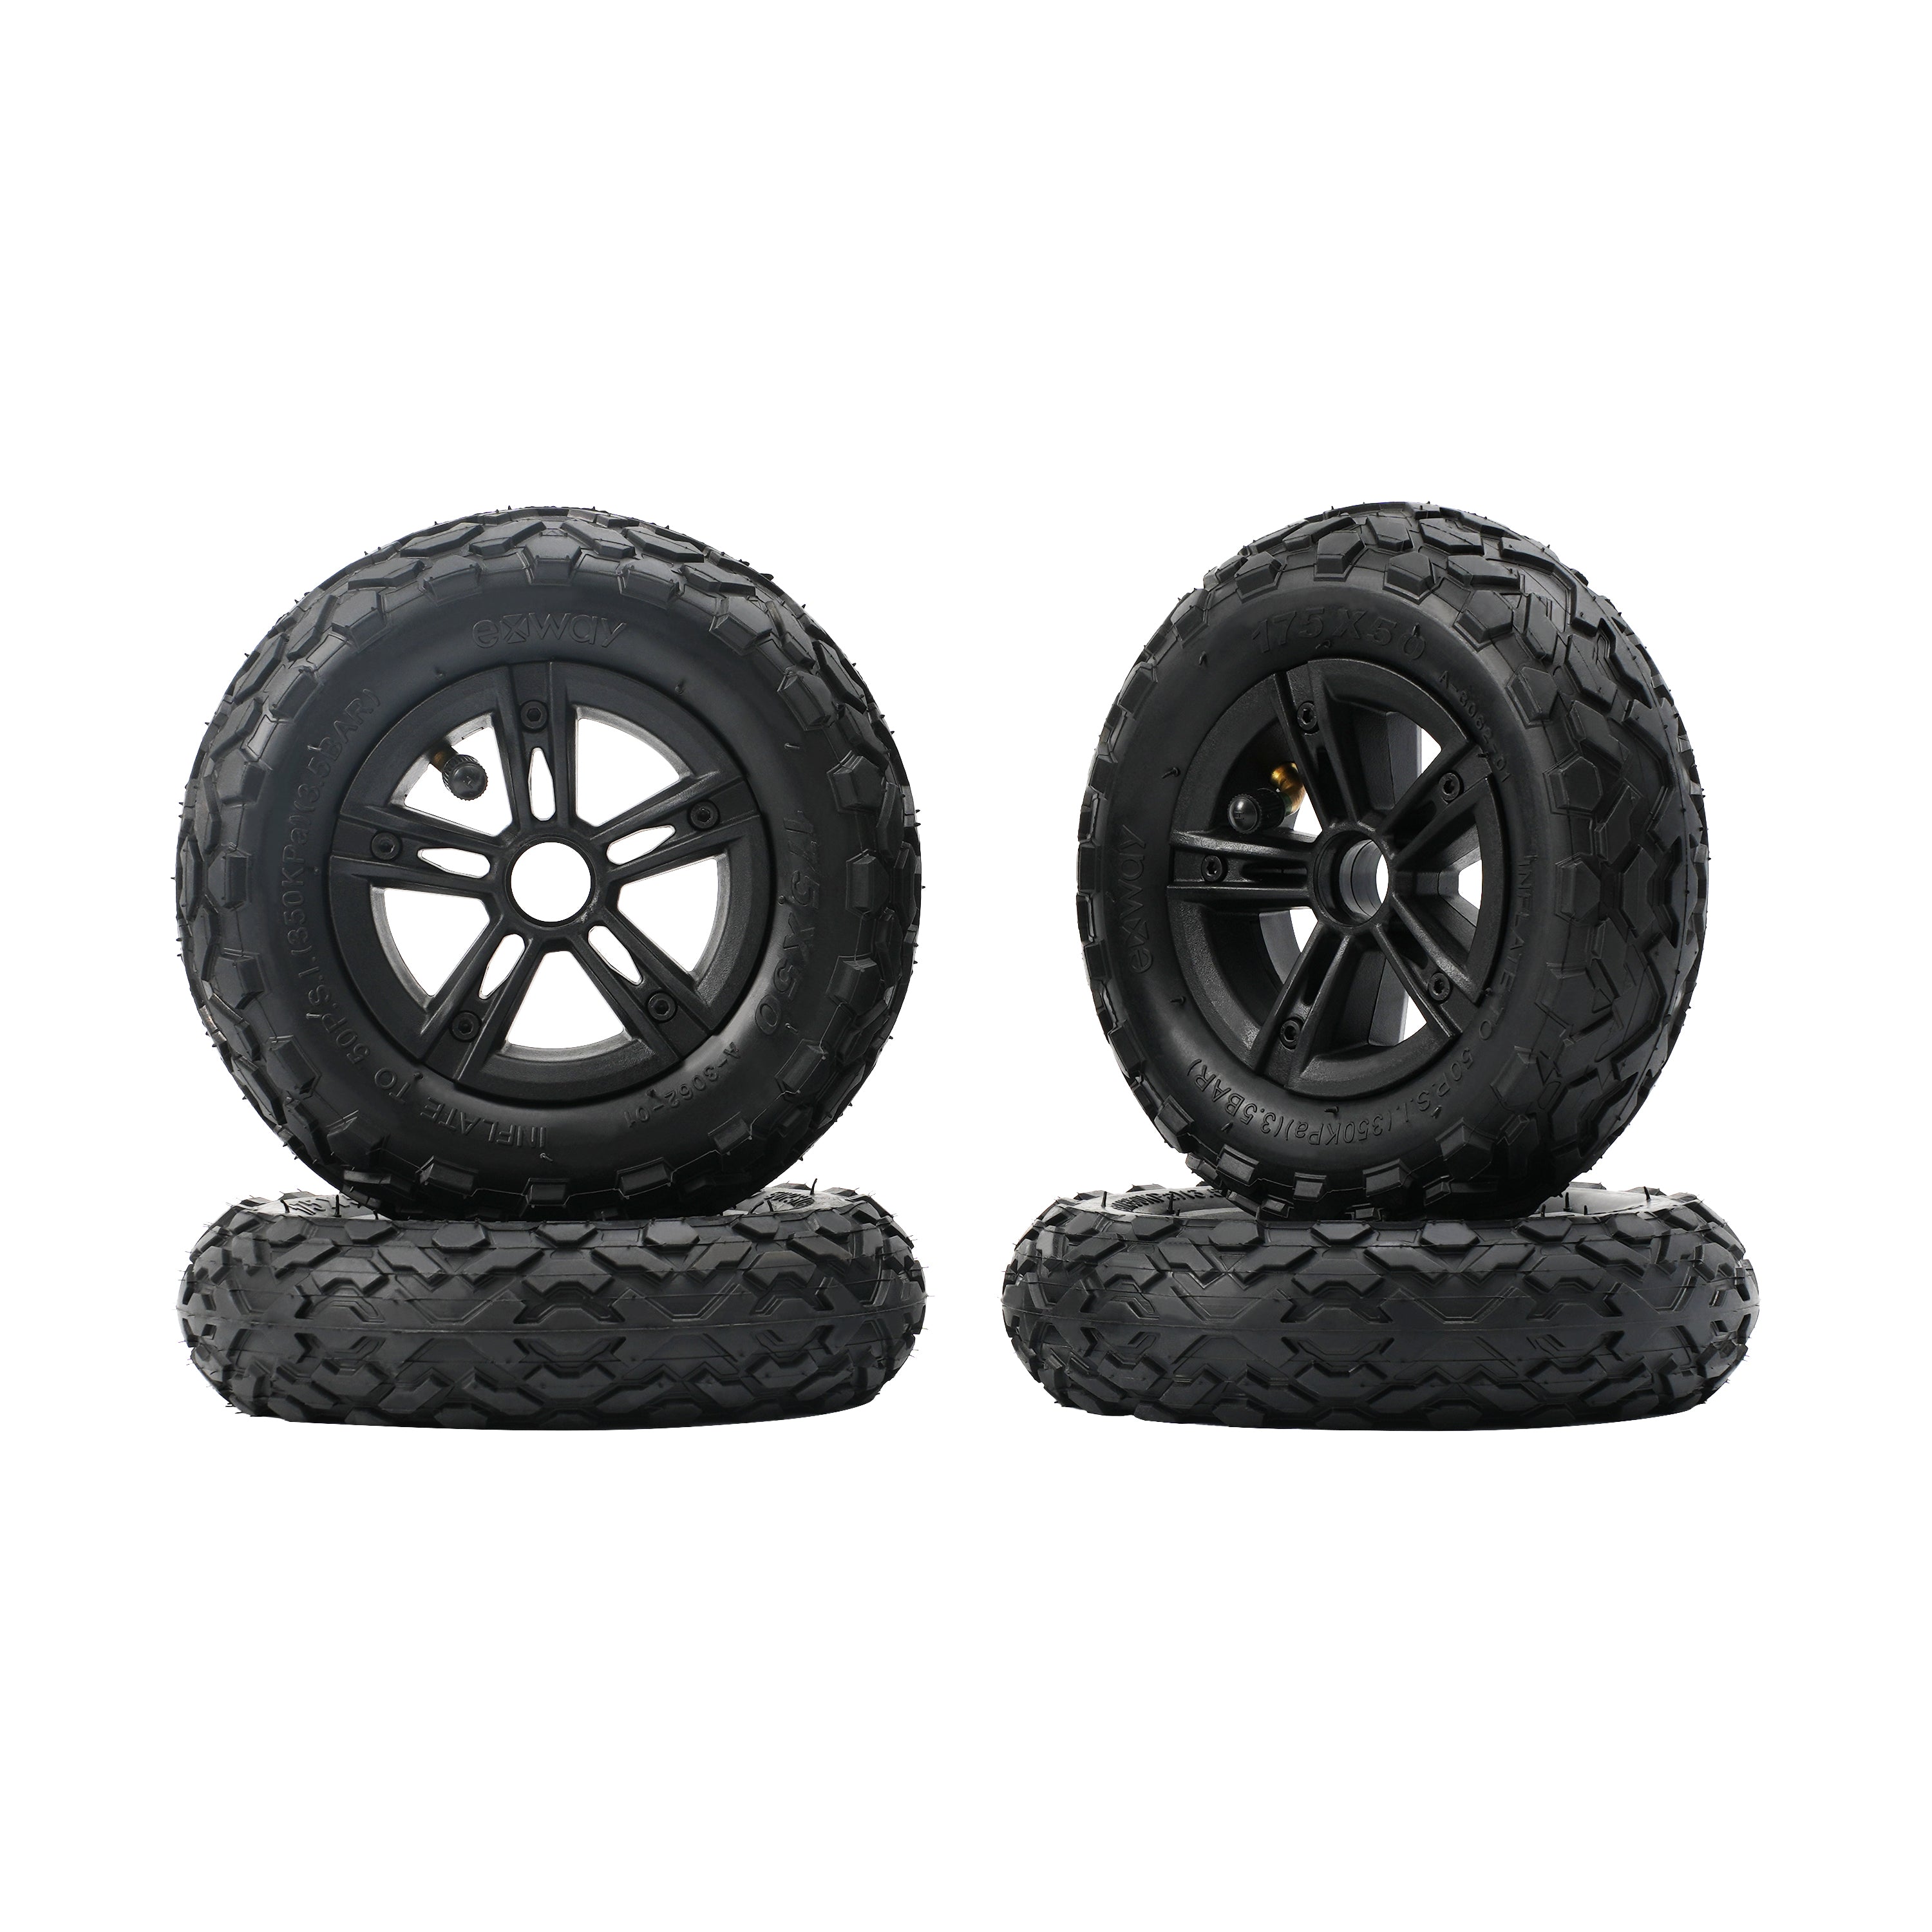 Off-Road Pneumatic Tires for Atlas